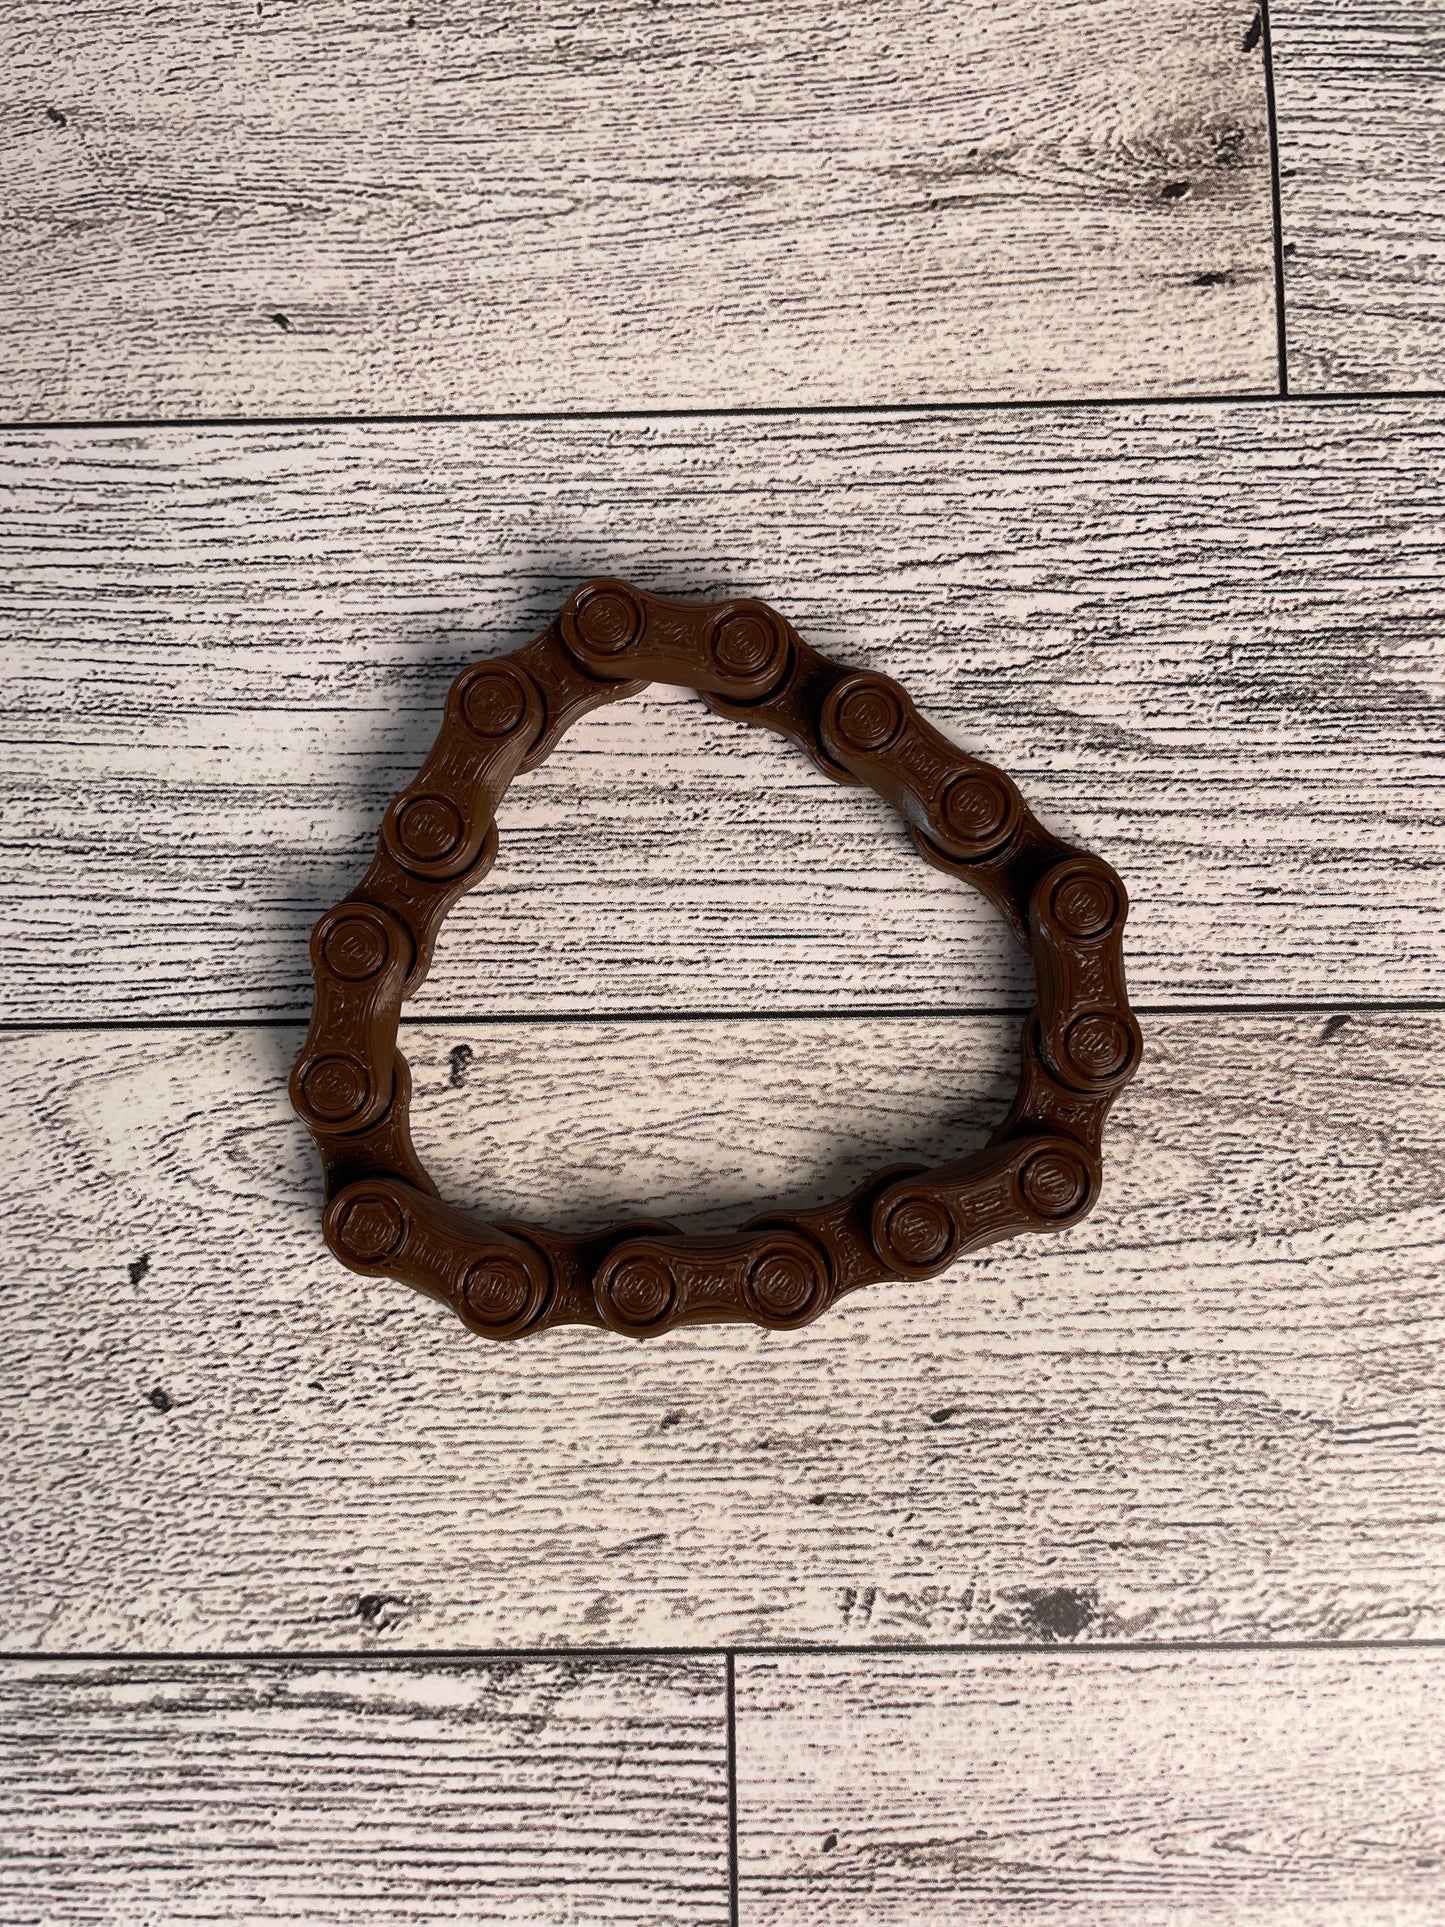 A brown chain link on a wood backdrop. The chain is arranged in a circle shape and there are eight links.